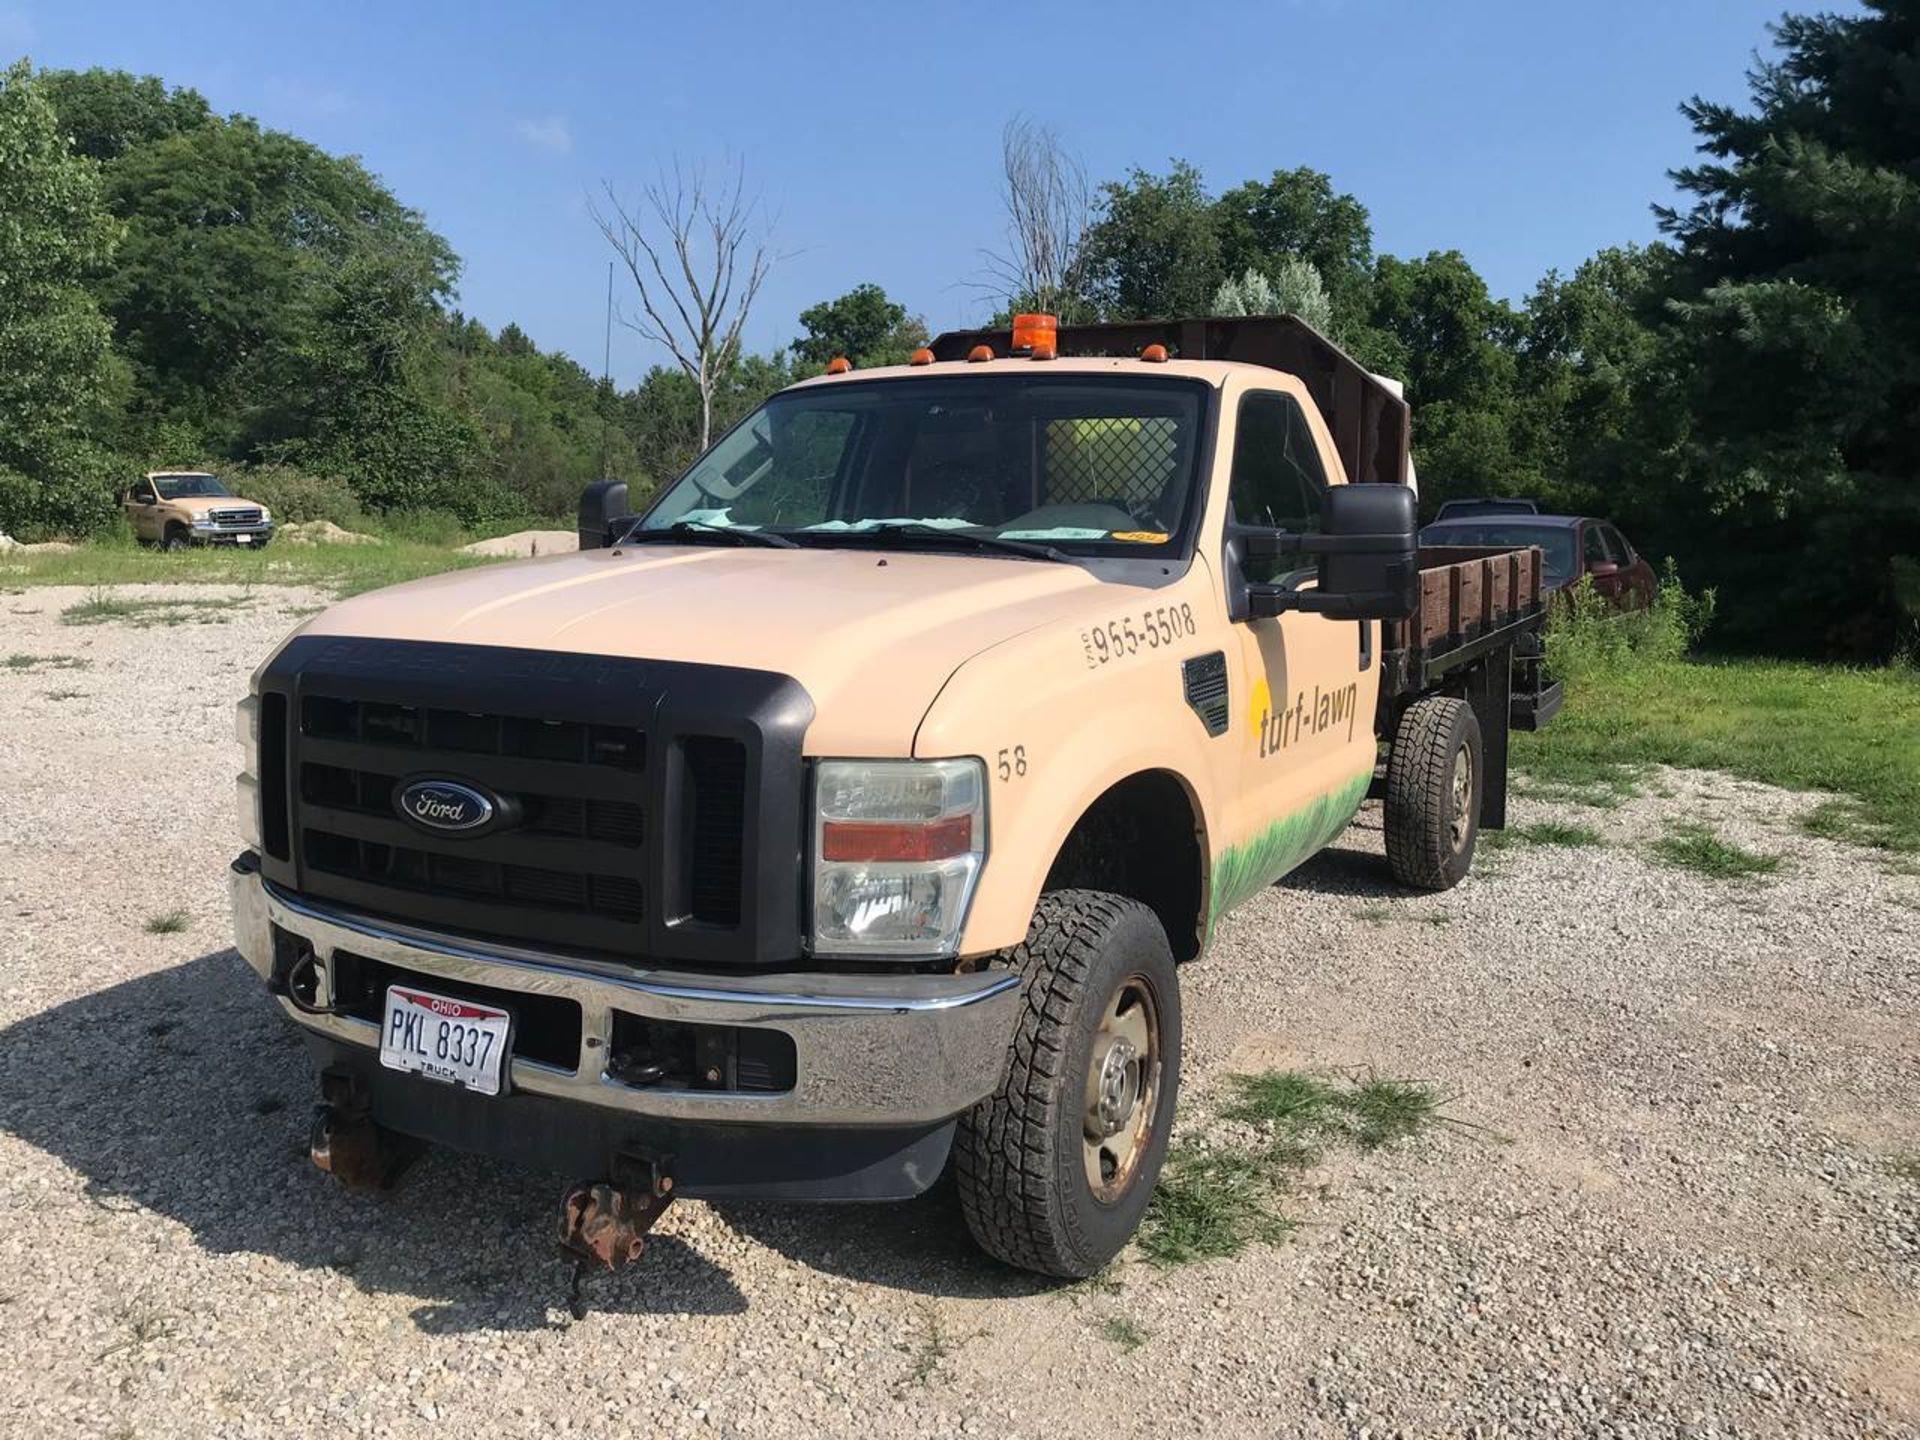 2008 Ford F-350 XL SUPER DUTY Stake Bed Truck - Image 2 of 18